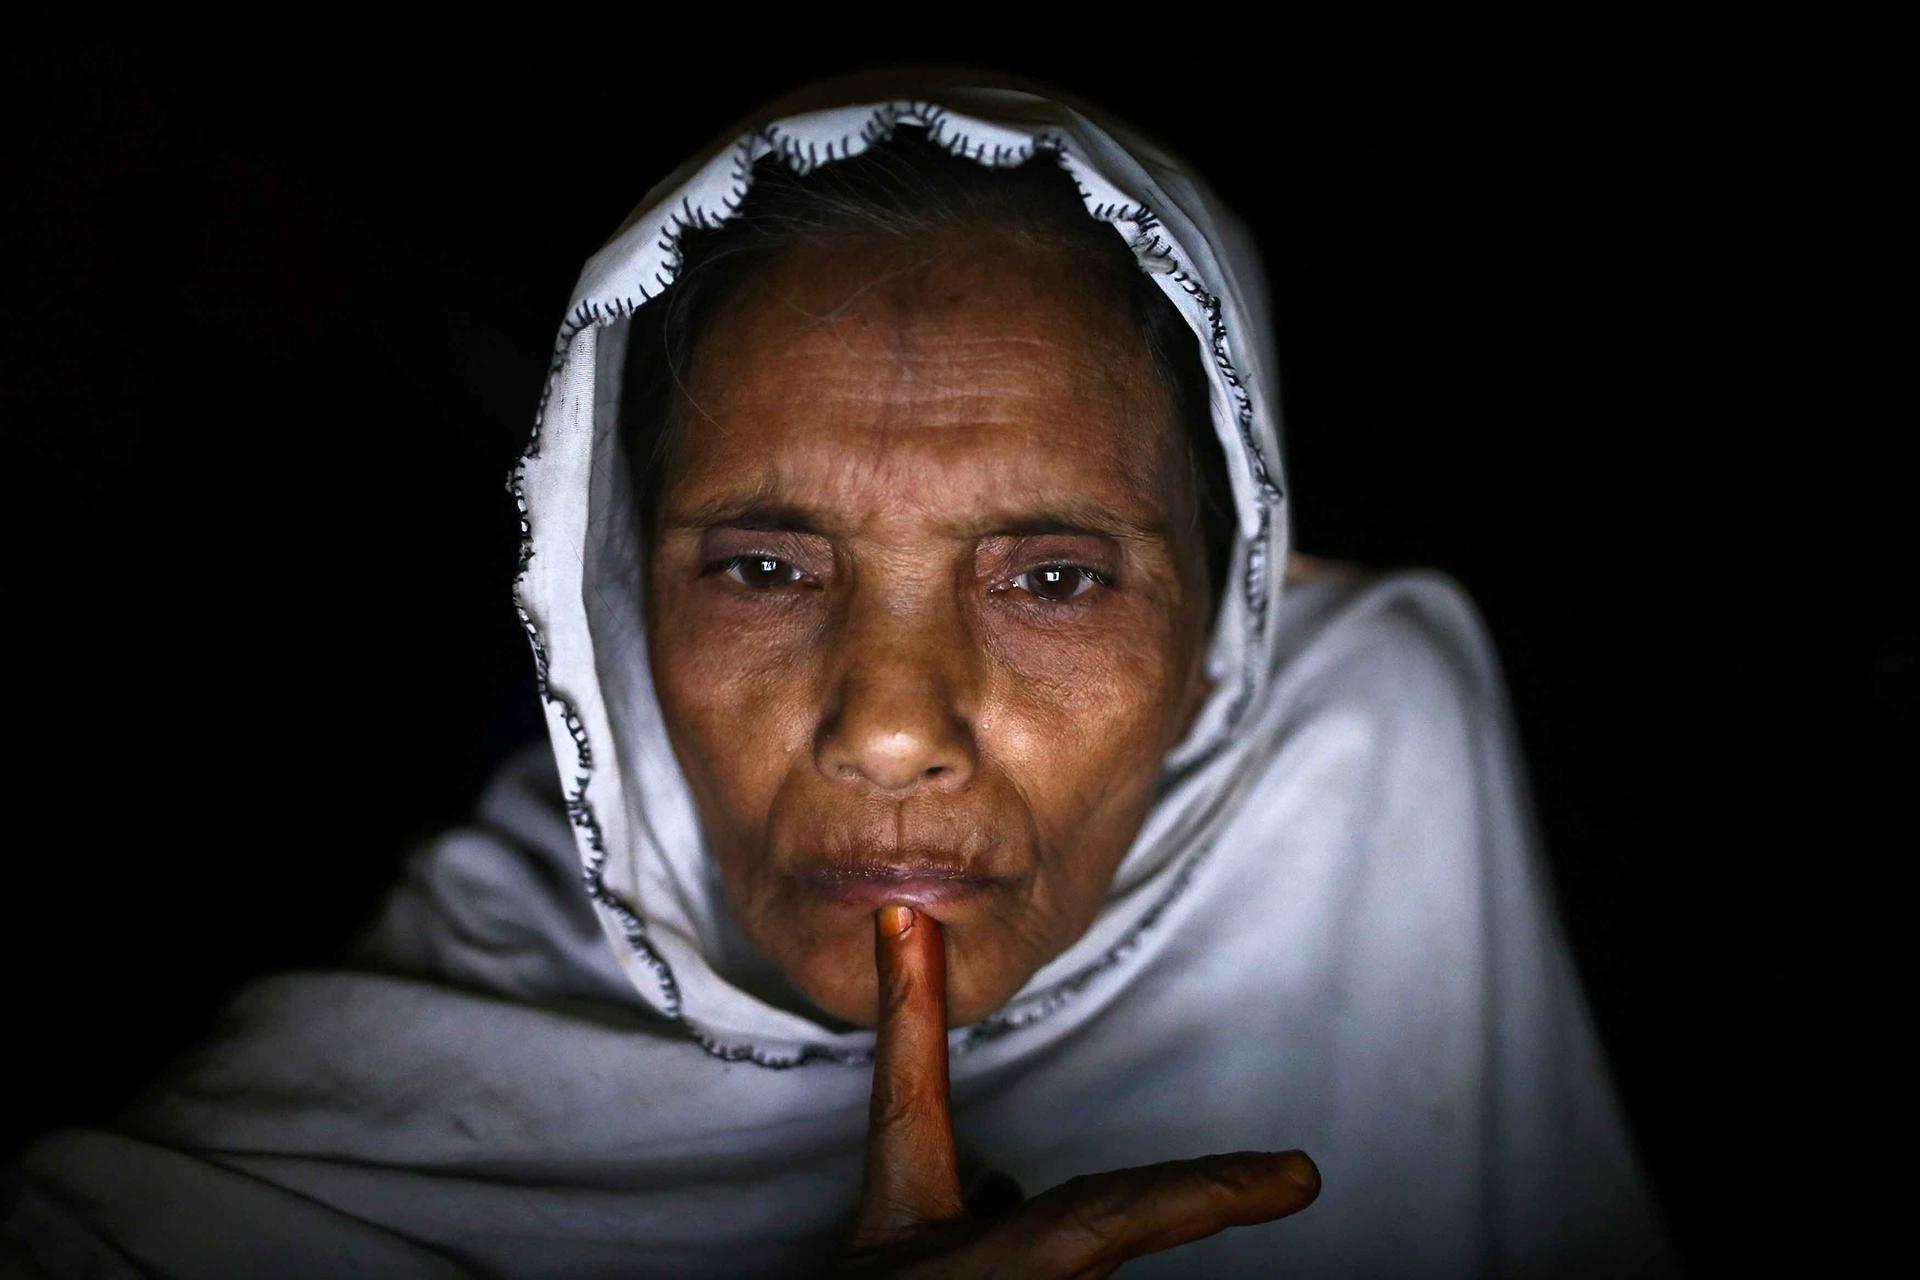 Norbanu, a 60-year-old Rohingya, speaks with her daughter's boyfriend, who is now in Indonesia, from an Internet hut in Thae Chaung village. He has broken his promise to send for her, Norbanu tells him, so she will now marry off her daughter to another ma